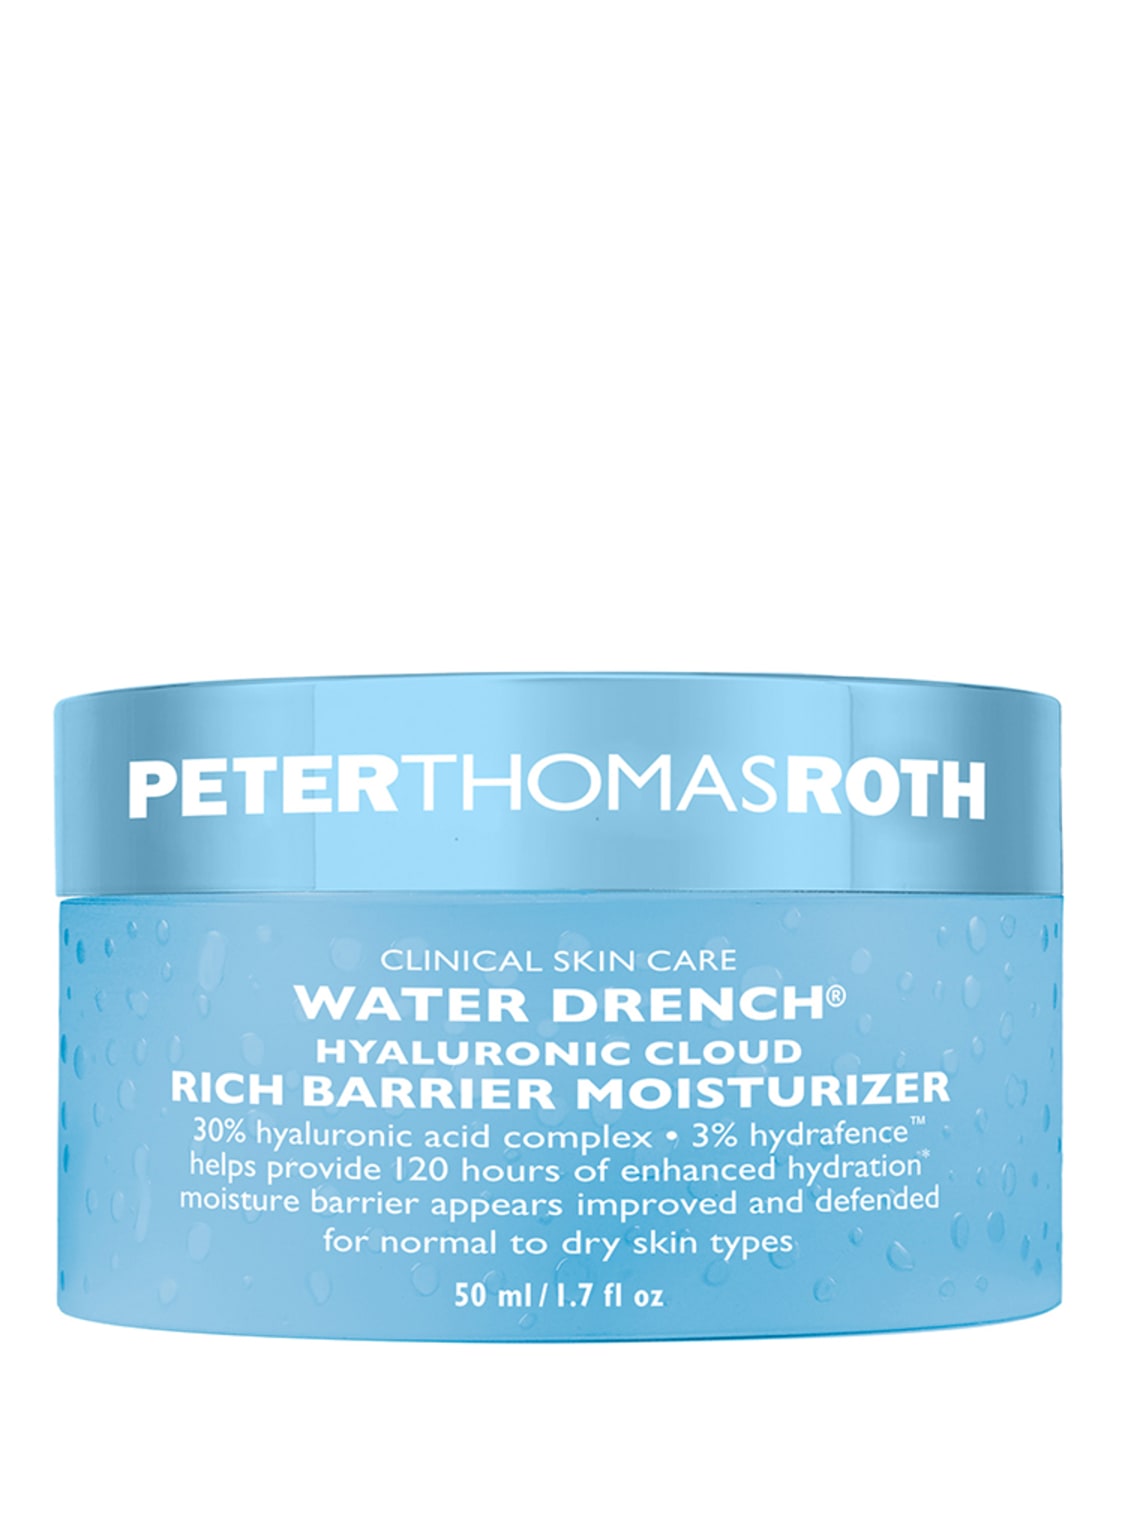 Peter Thomas Roth Water Drench® Hyaluronic Cloud Rich Barrier Moisturizer 50 ml von PETER THOMAS ROTH